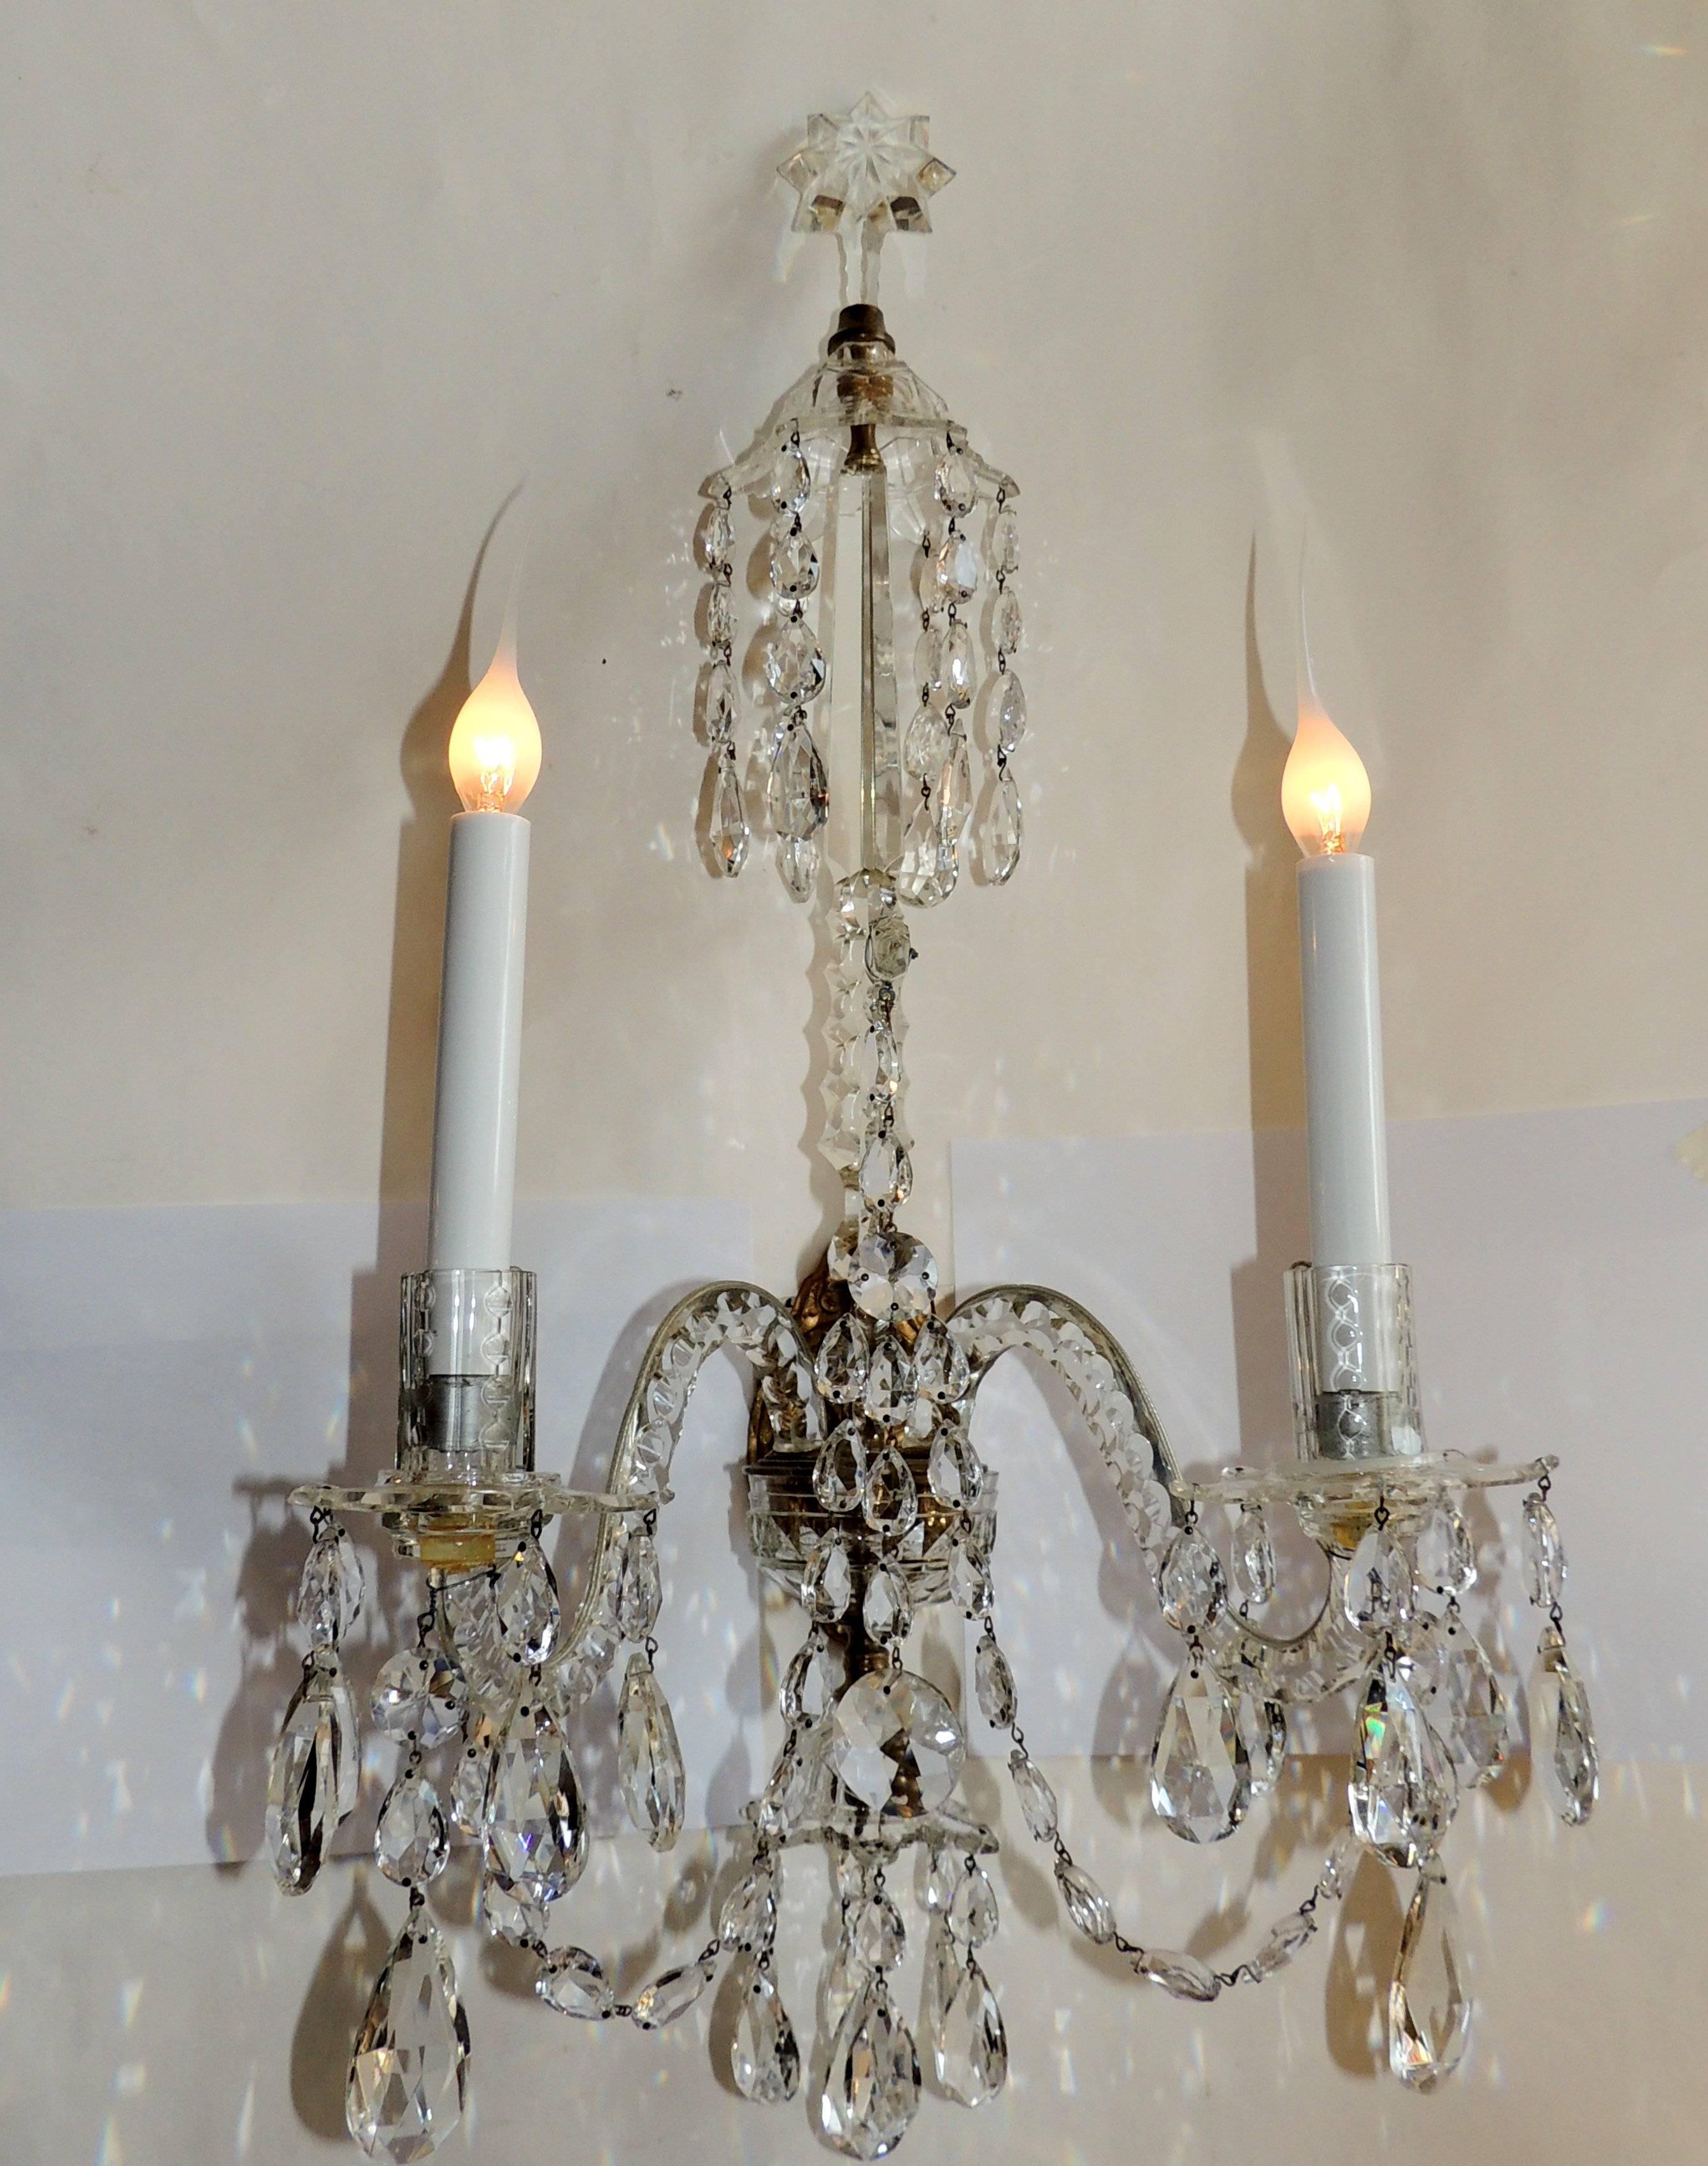 This elegant pair of all crystal sconces have beautiful cut crystal arms and star-shaped candle cups. In the center, a third-arm rises upon which draped crystal beads accent the center bronze support encased in crystal and a star-shaped crystal